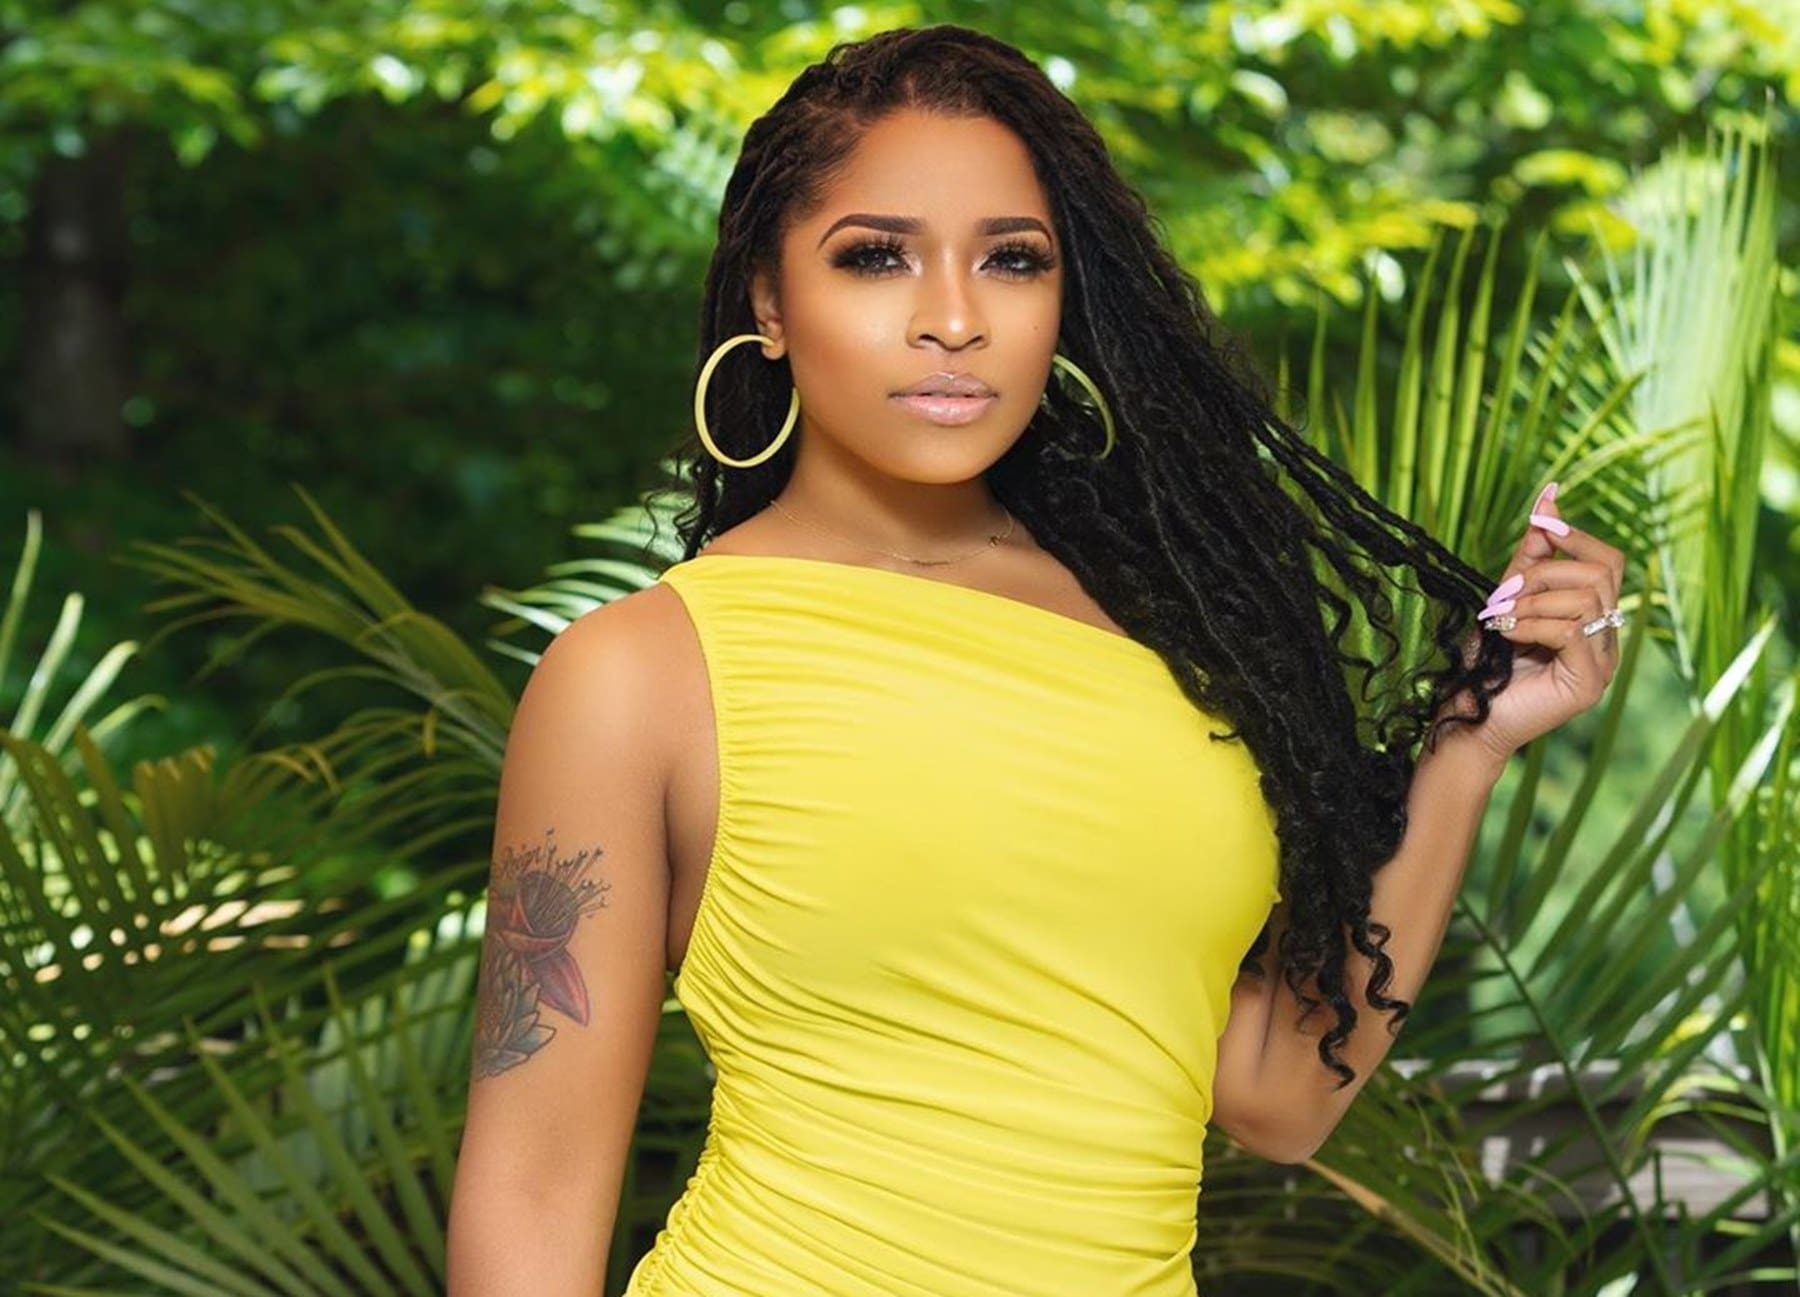 Toya Johnson Looks Gorgeous At A Recent Brunch She Had With Her Family - See More Photos